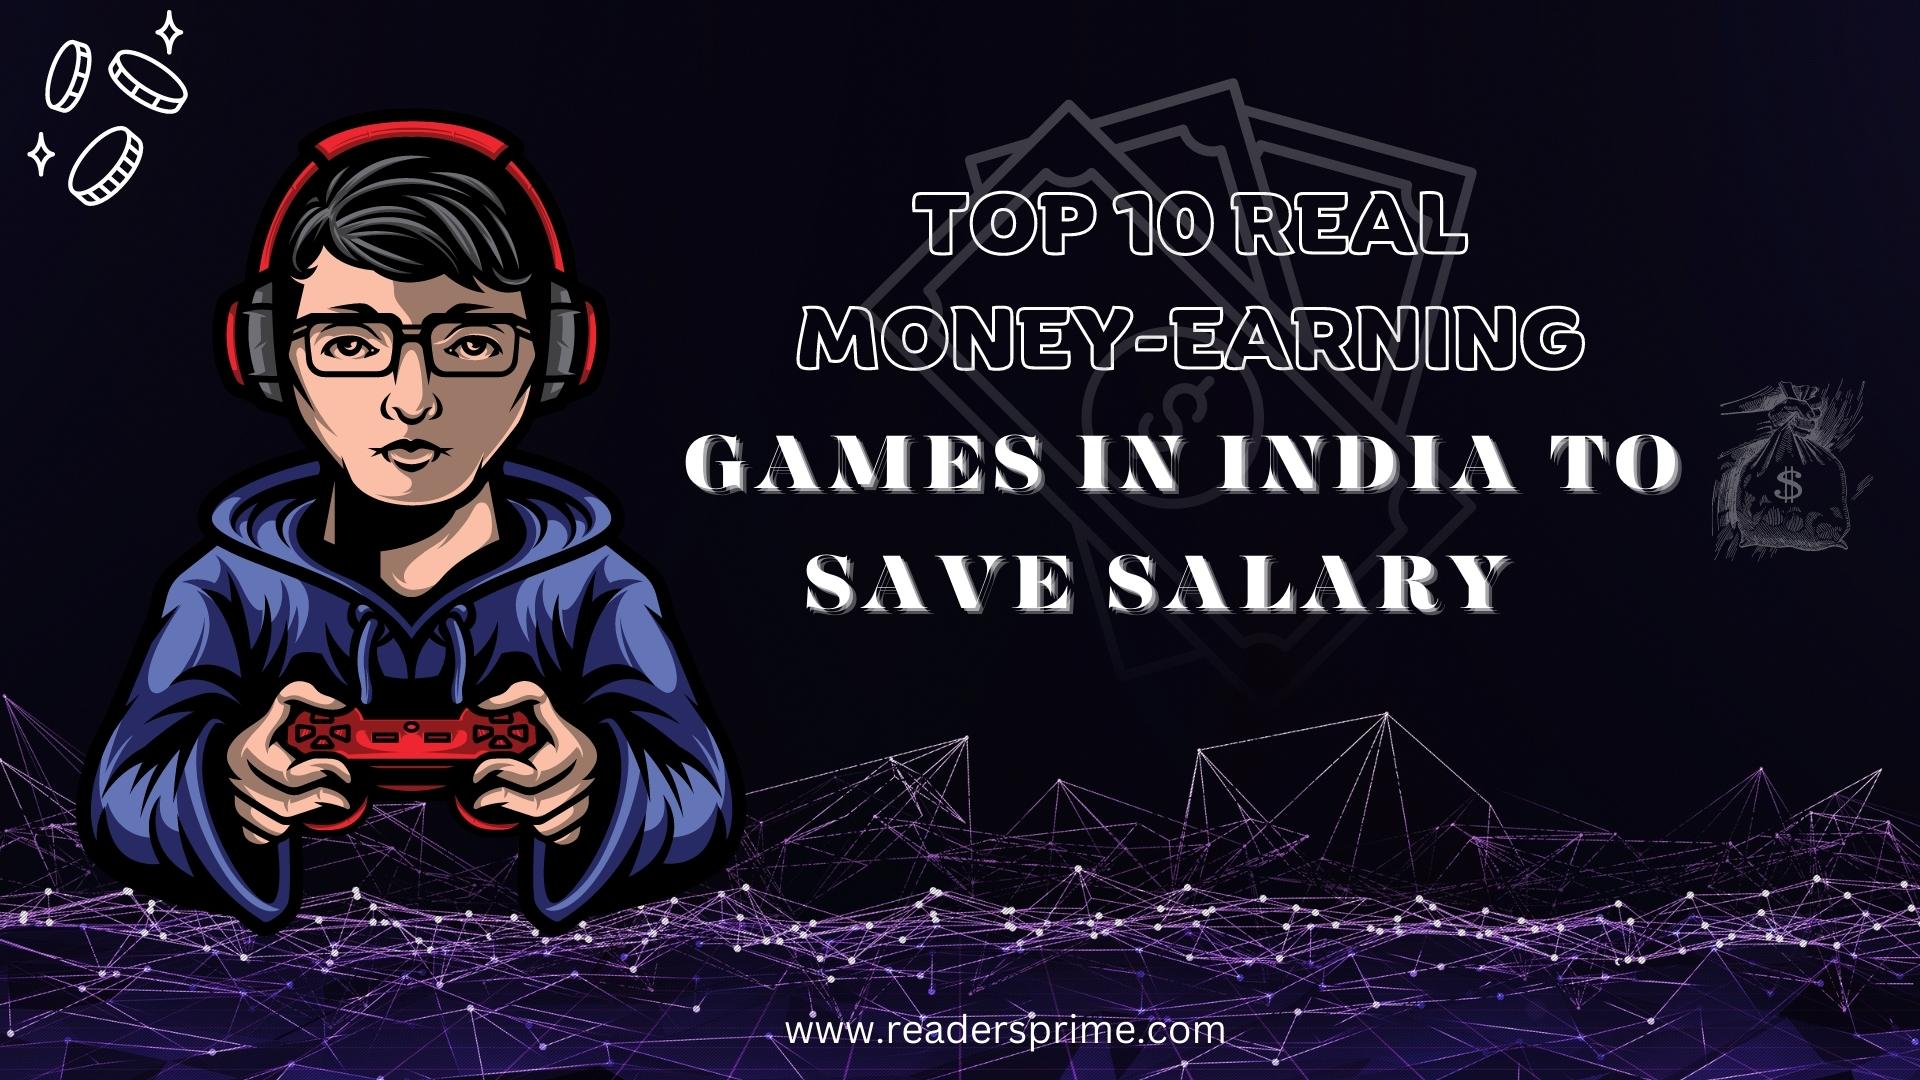 Top 10 Real Money Earning Games in India to Save Salary